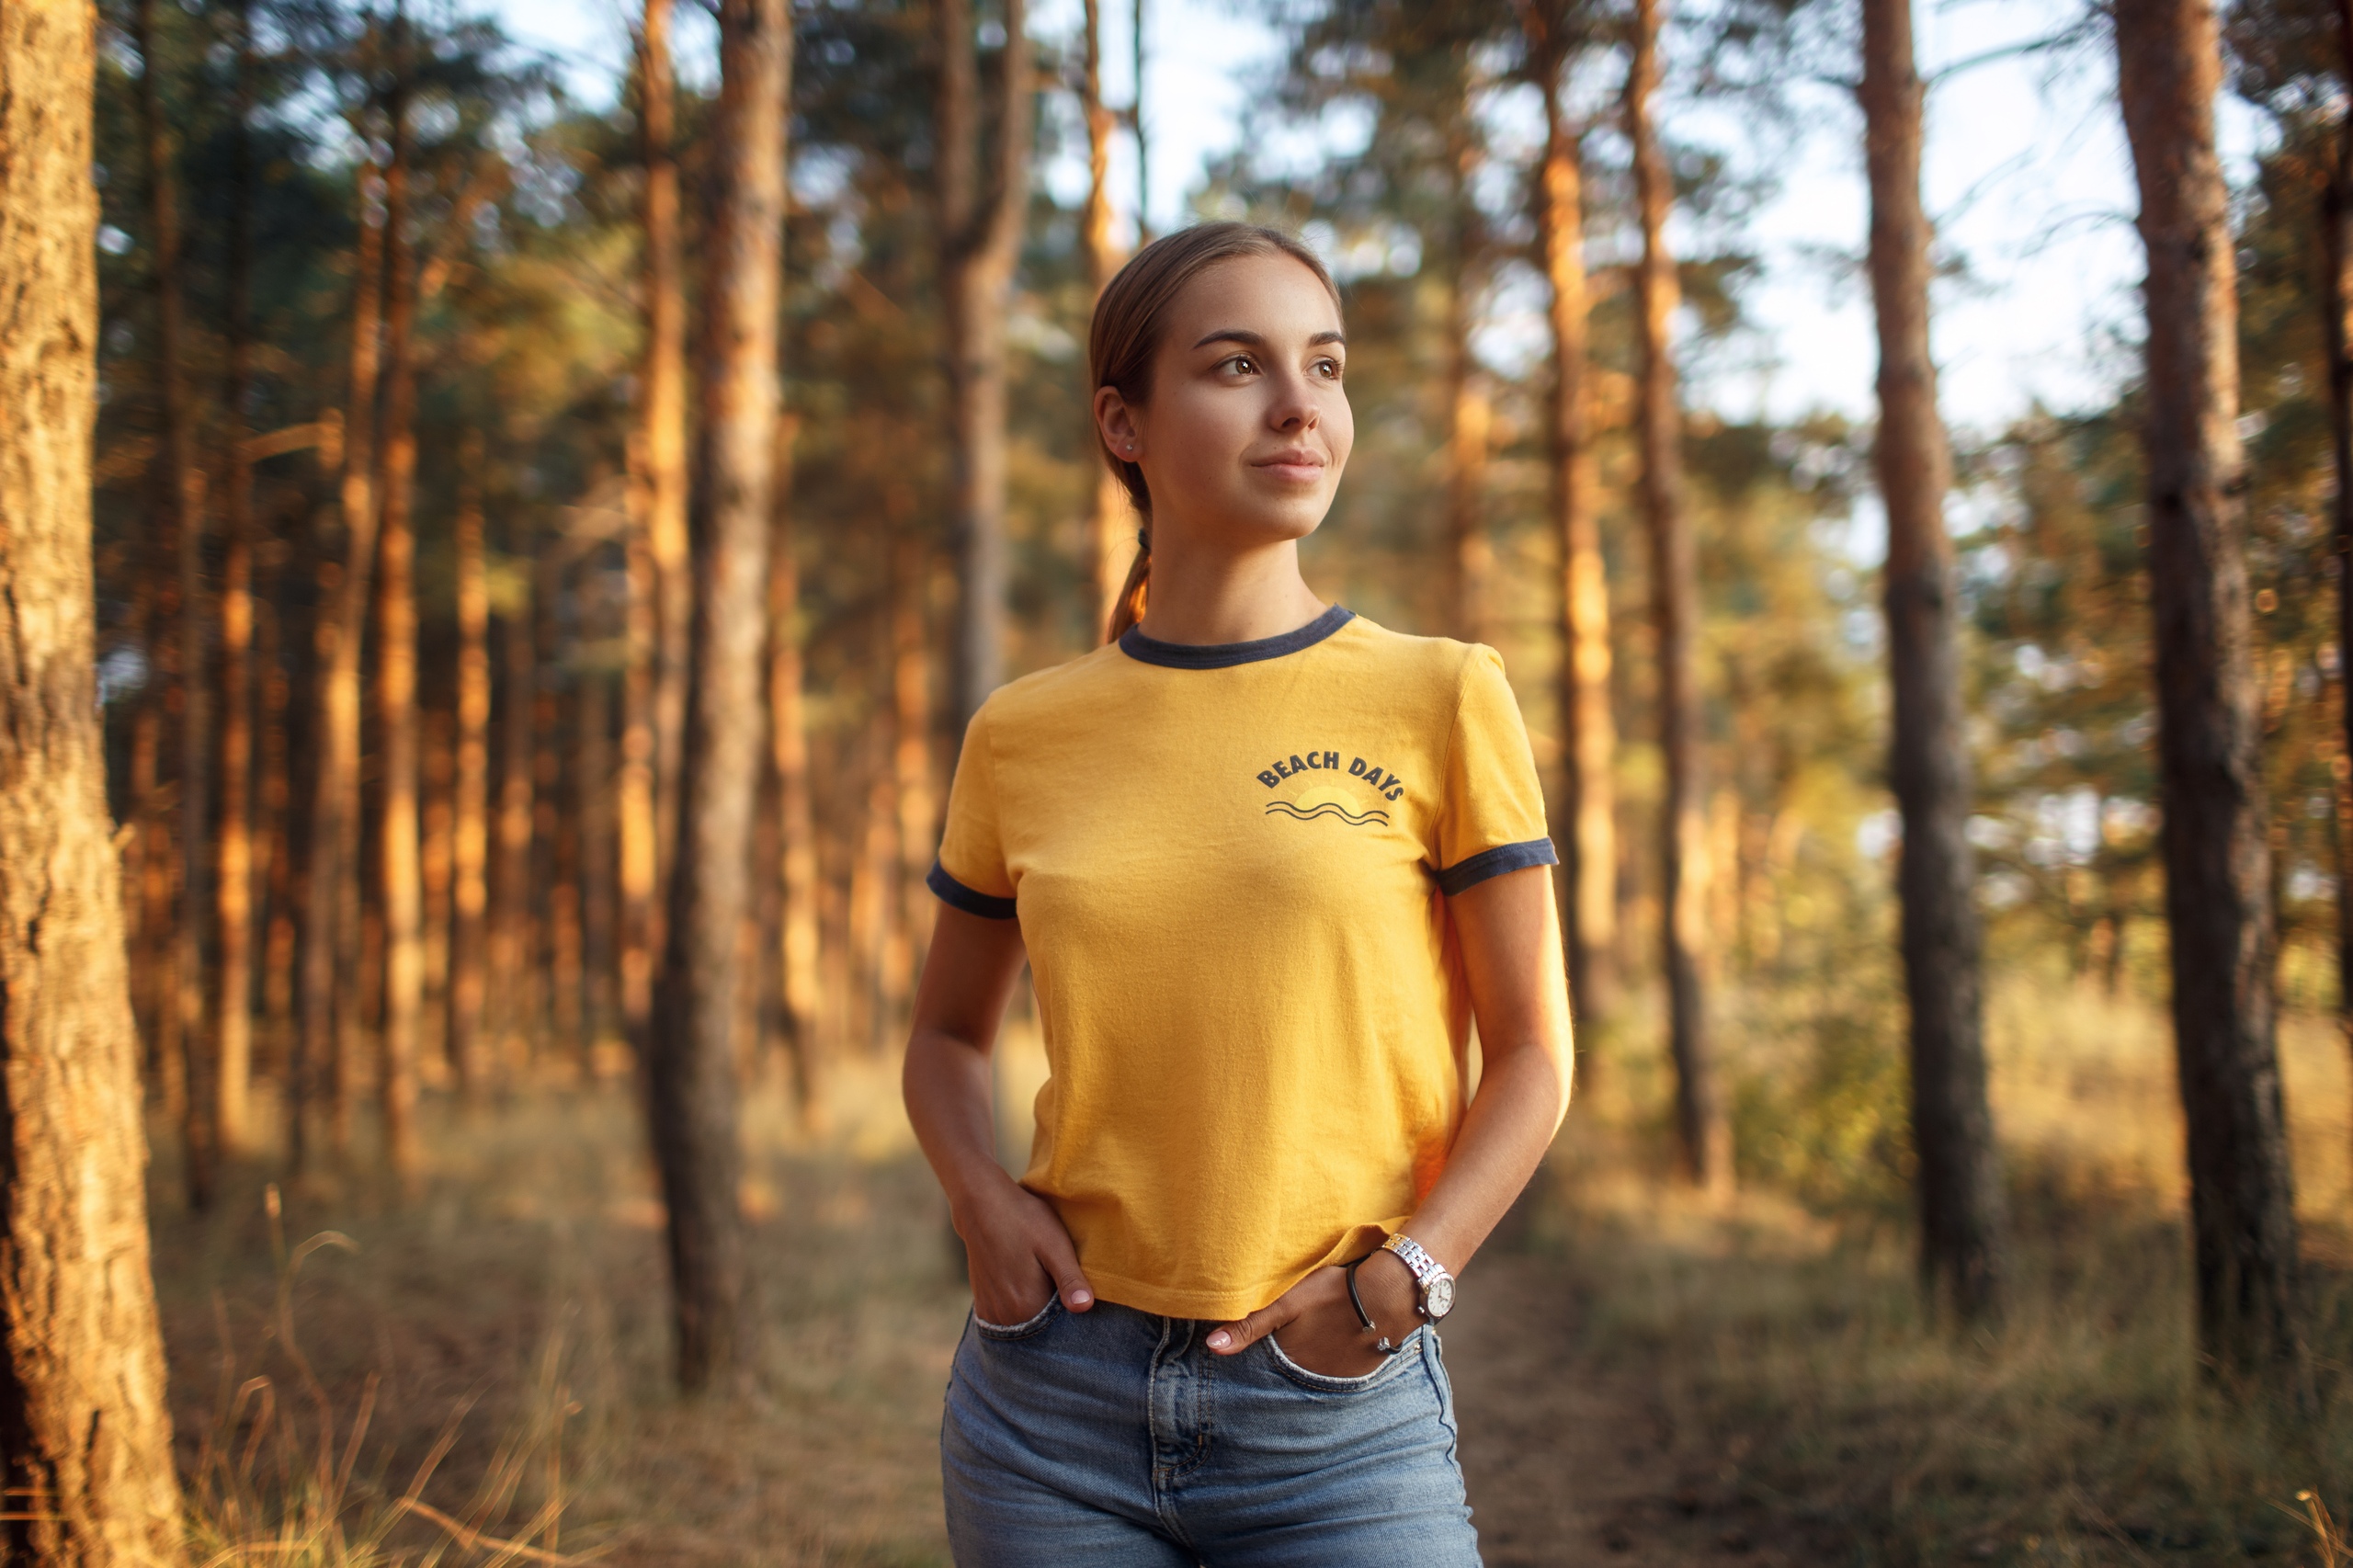 People 2560x1706 women model ponytail looking away brown eyes T-shirt jeans hands in pockets watch trees forest depth of field portrait outdoors women outdoors smiling wristwatch